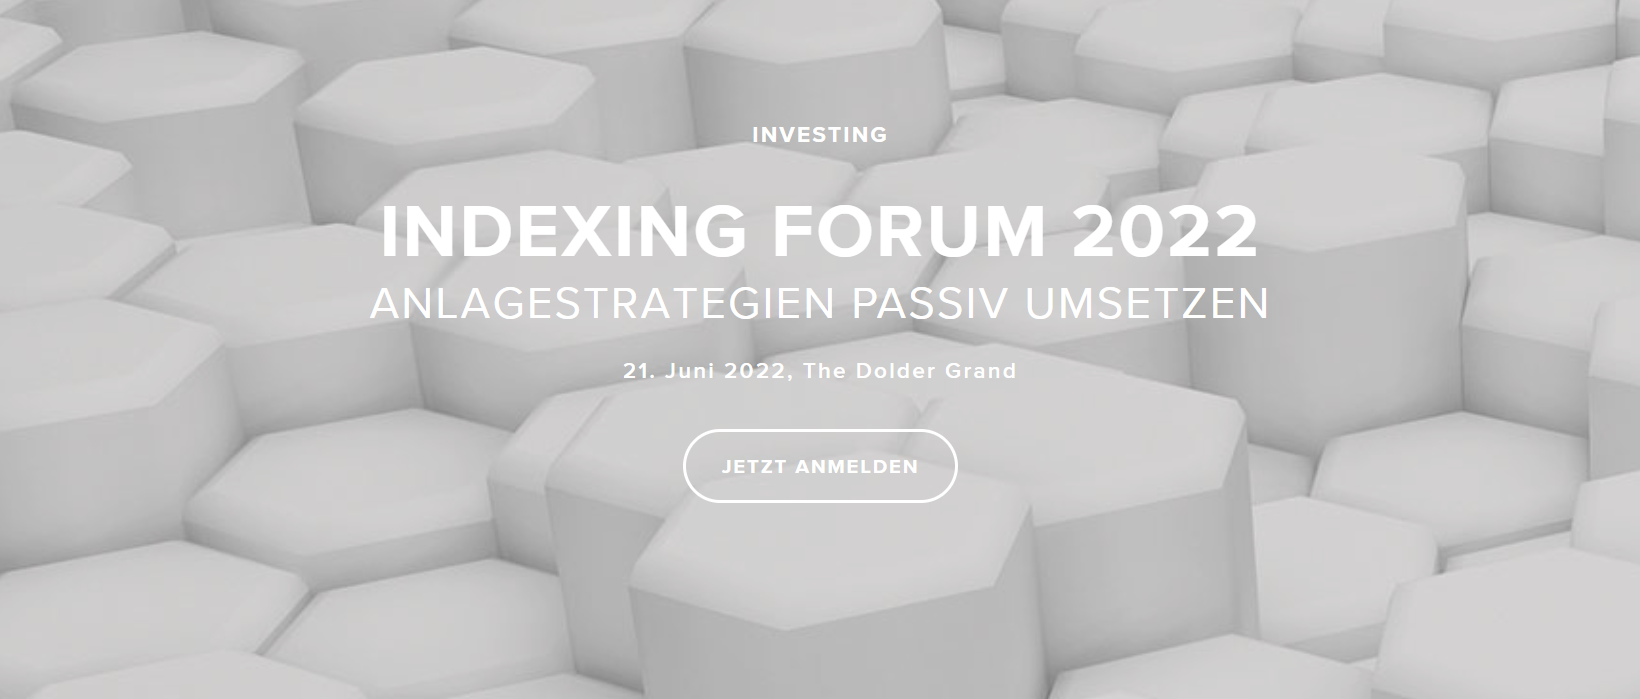 Indexing Forum 2022 – Implement investment strategies passively